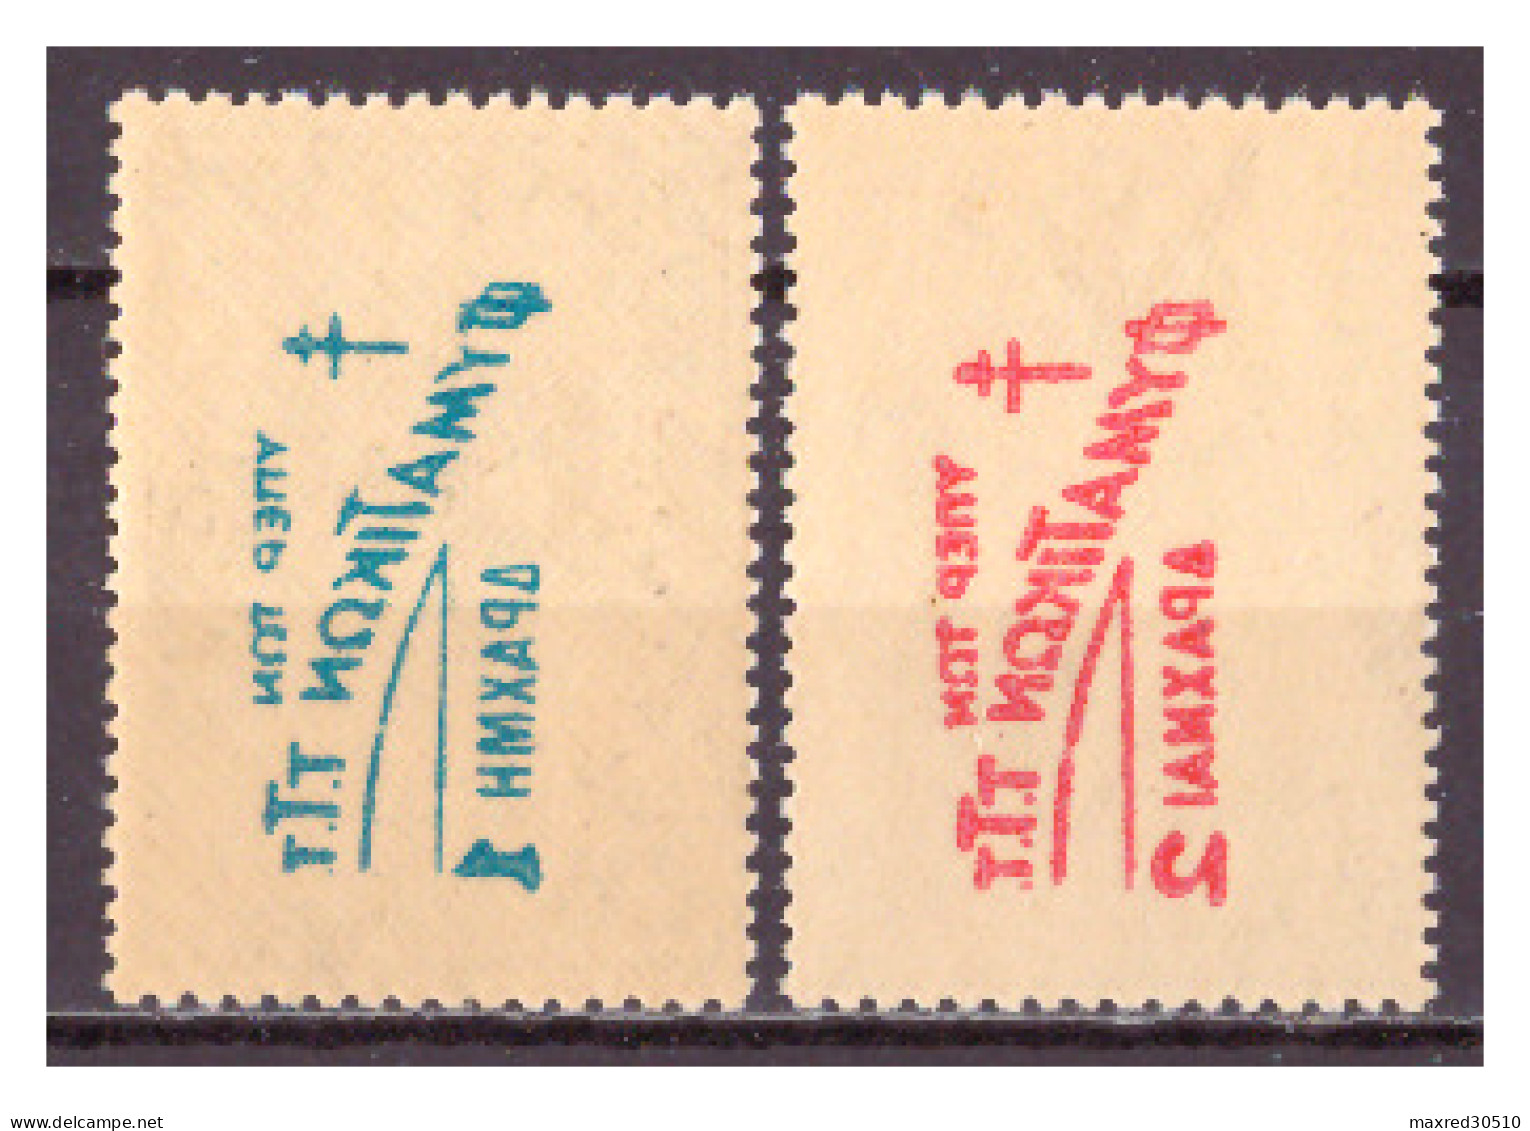 GREECE 1945 CHARITY SET "1937 STAMPS WITH OVERPRINT" WITH MIRROR PRINTING AT THE GUM ERROR MNH - Varietà & Curiosità